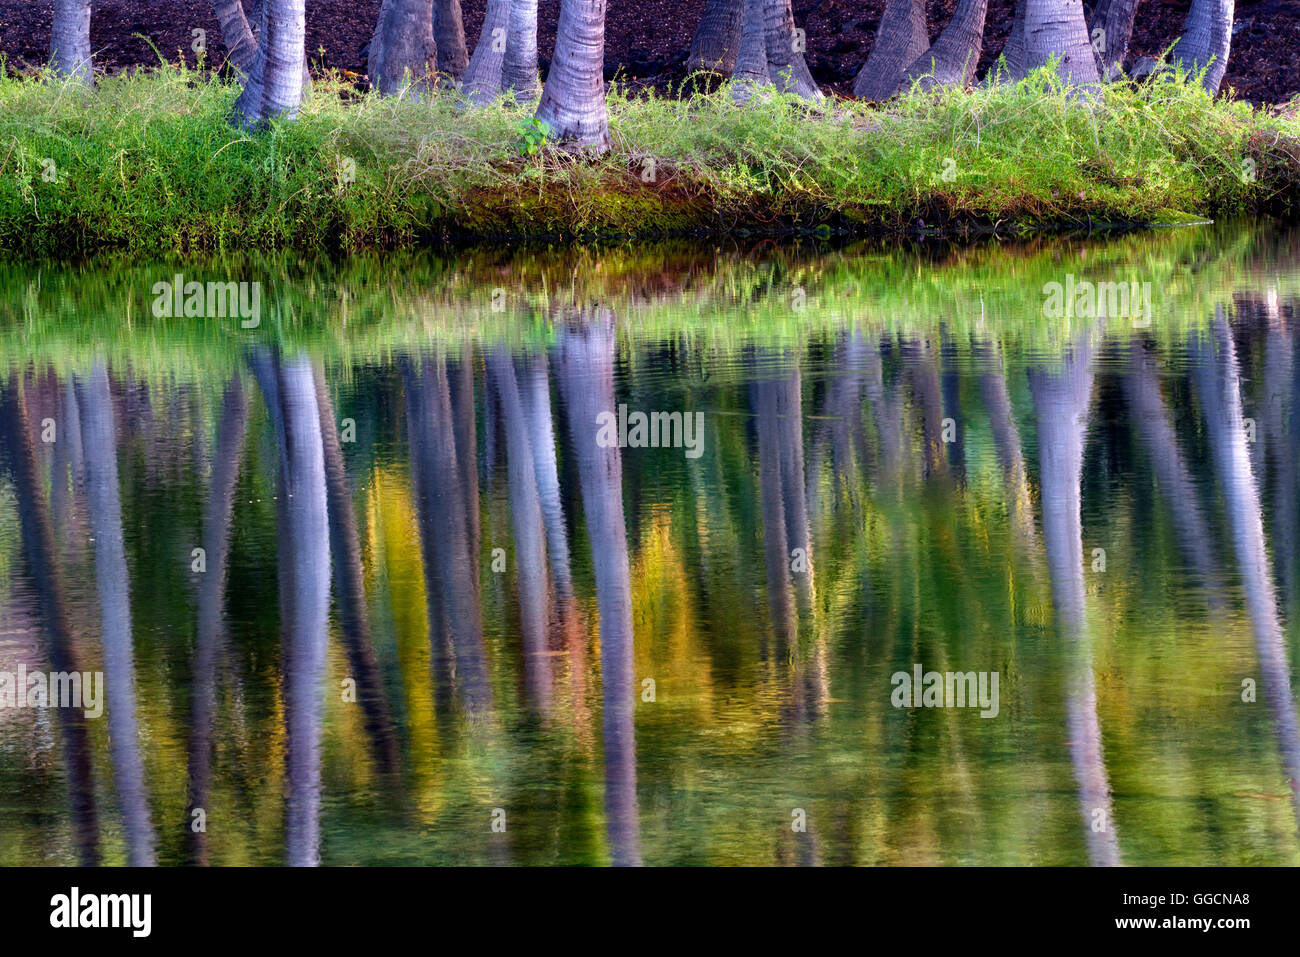 Palm trees reflecting in water of Lahuipua'a and Kaaiopio Ponds. Hawaii Island Stock Photo